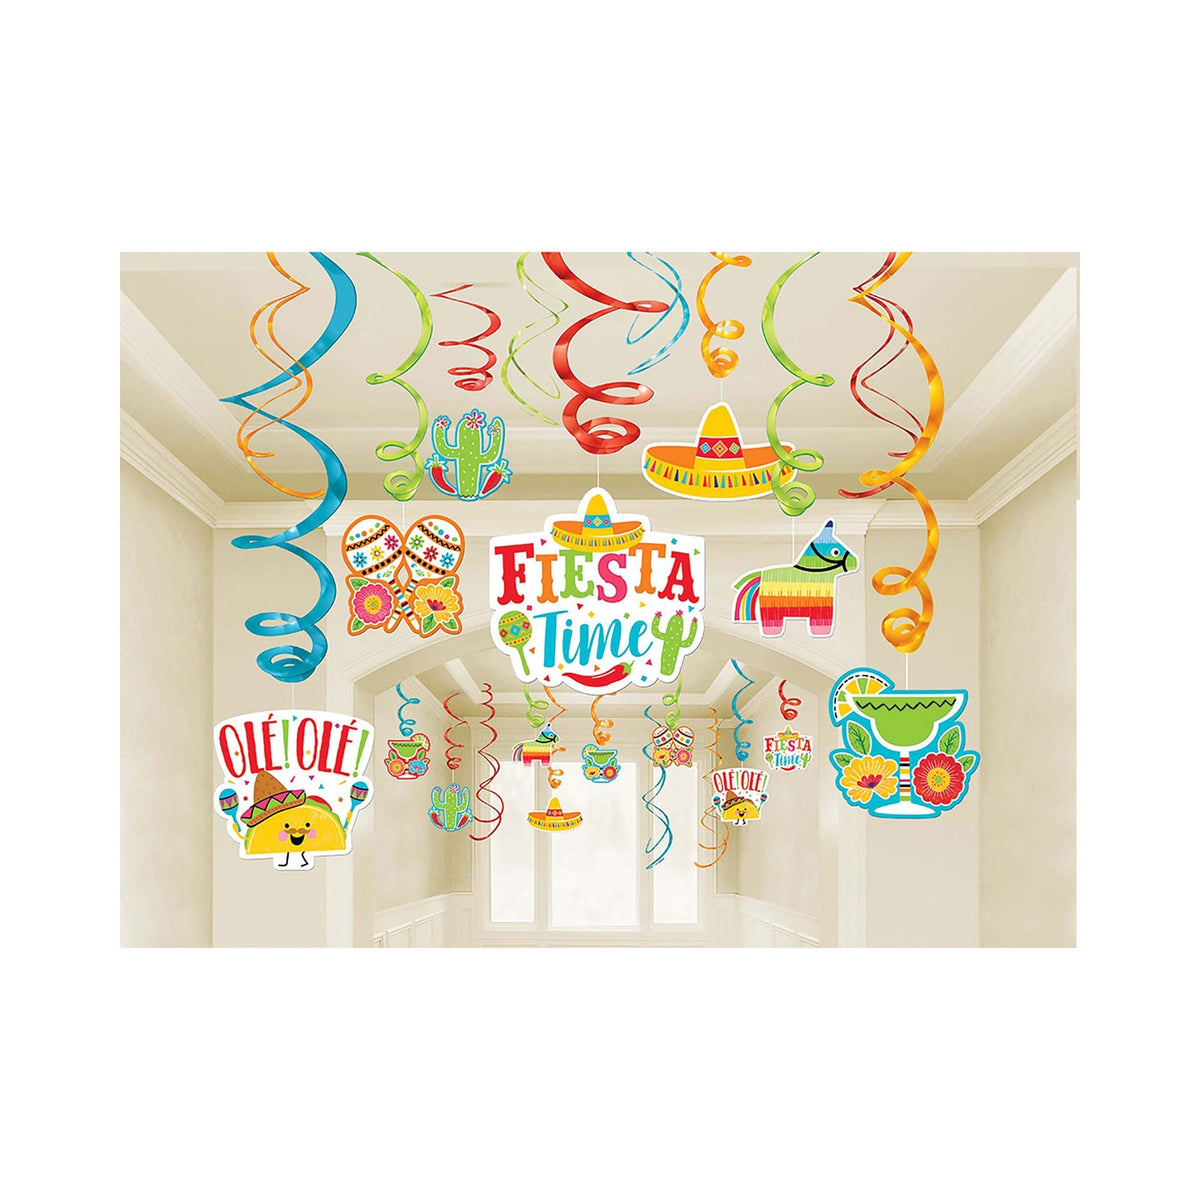 AMSCAN CA Theme Party Fiesta Party Spiral Decoration Kit with Cutouts, 30 Count 192937022238